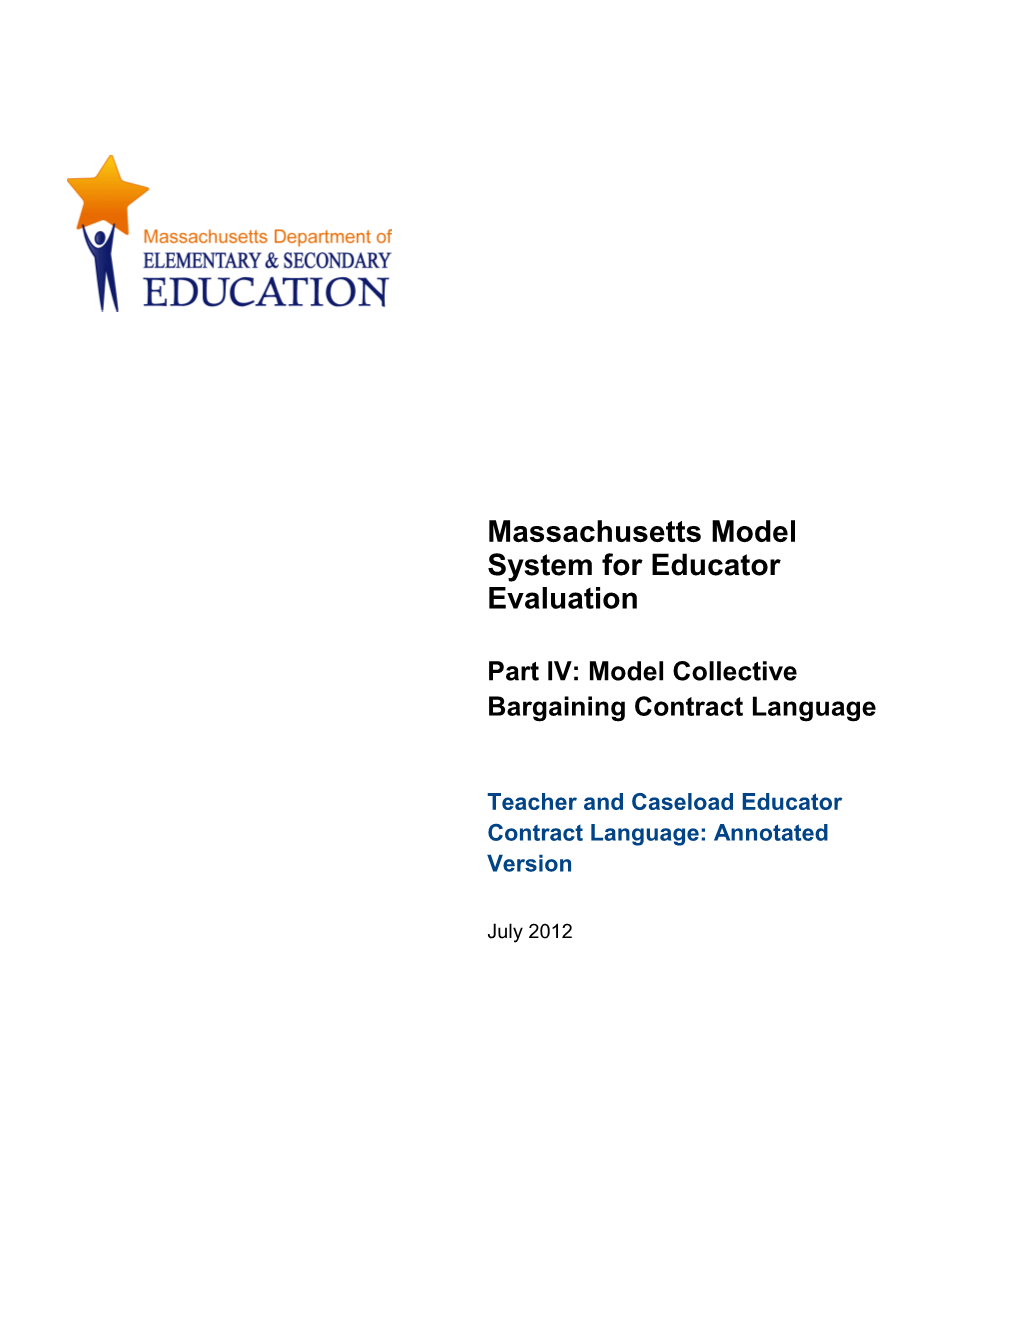 ANNOTATED Model Collective Bargaining Contract Language for Teachers